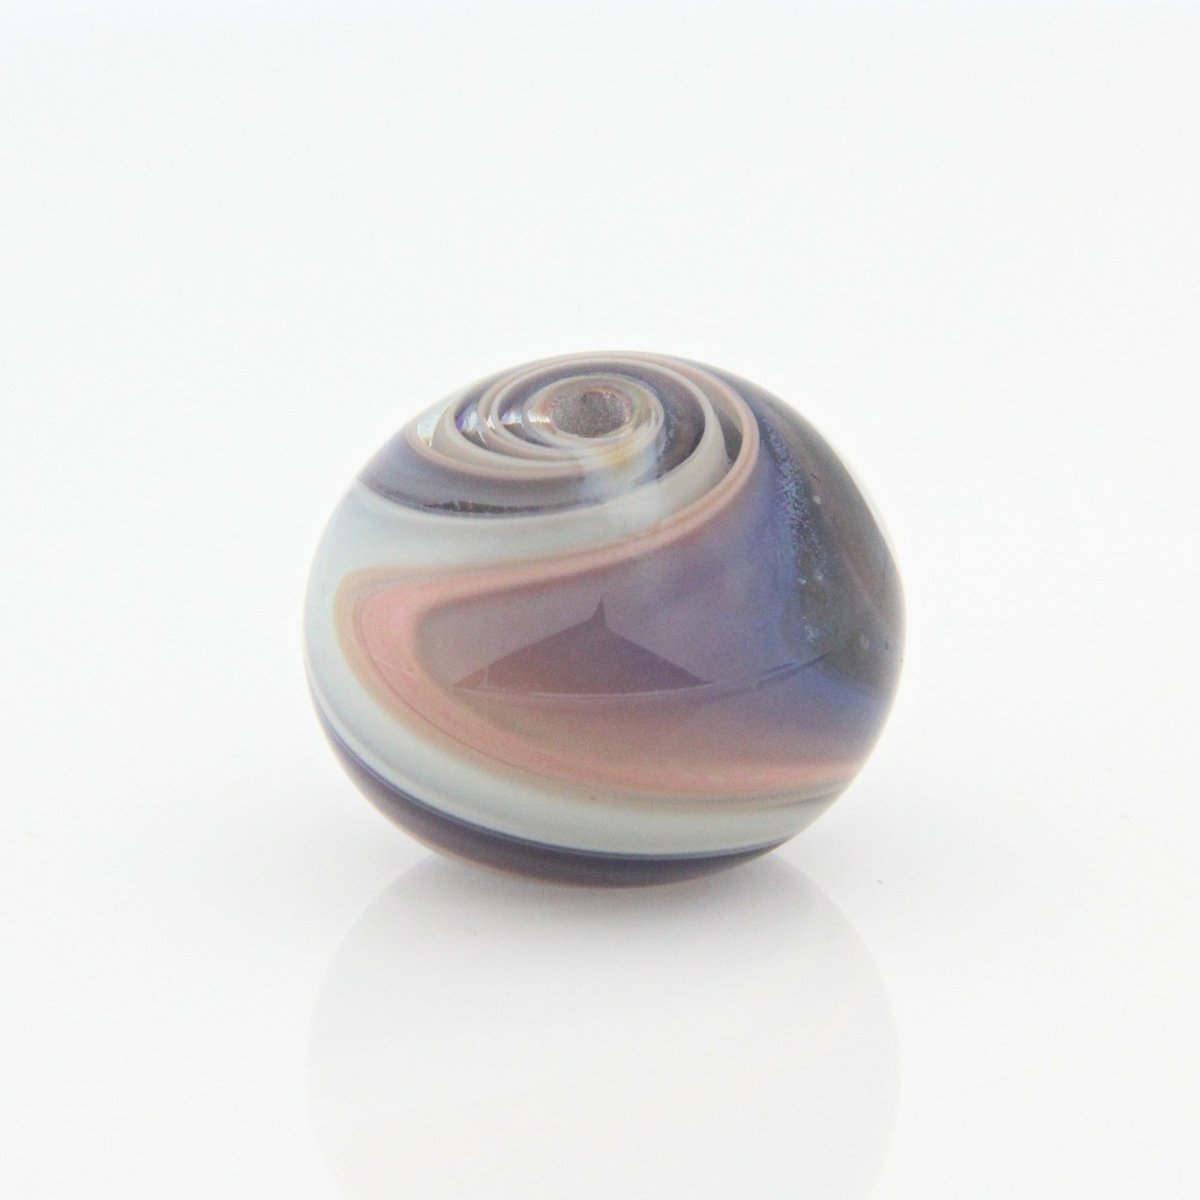 Purple and Pink Striped Statement Bead - Handmade Glass Lampwork, Unique Focal Bead for Pendant, Suncatcher, or Home Decorating